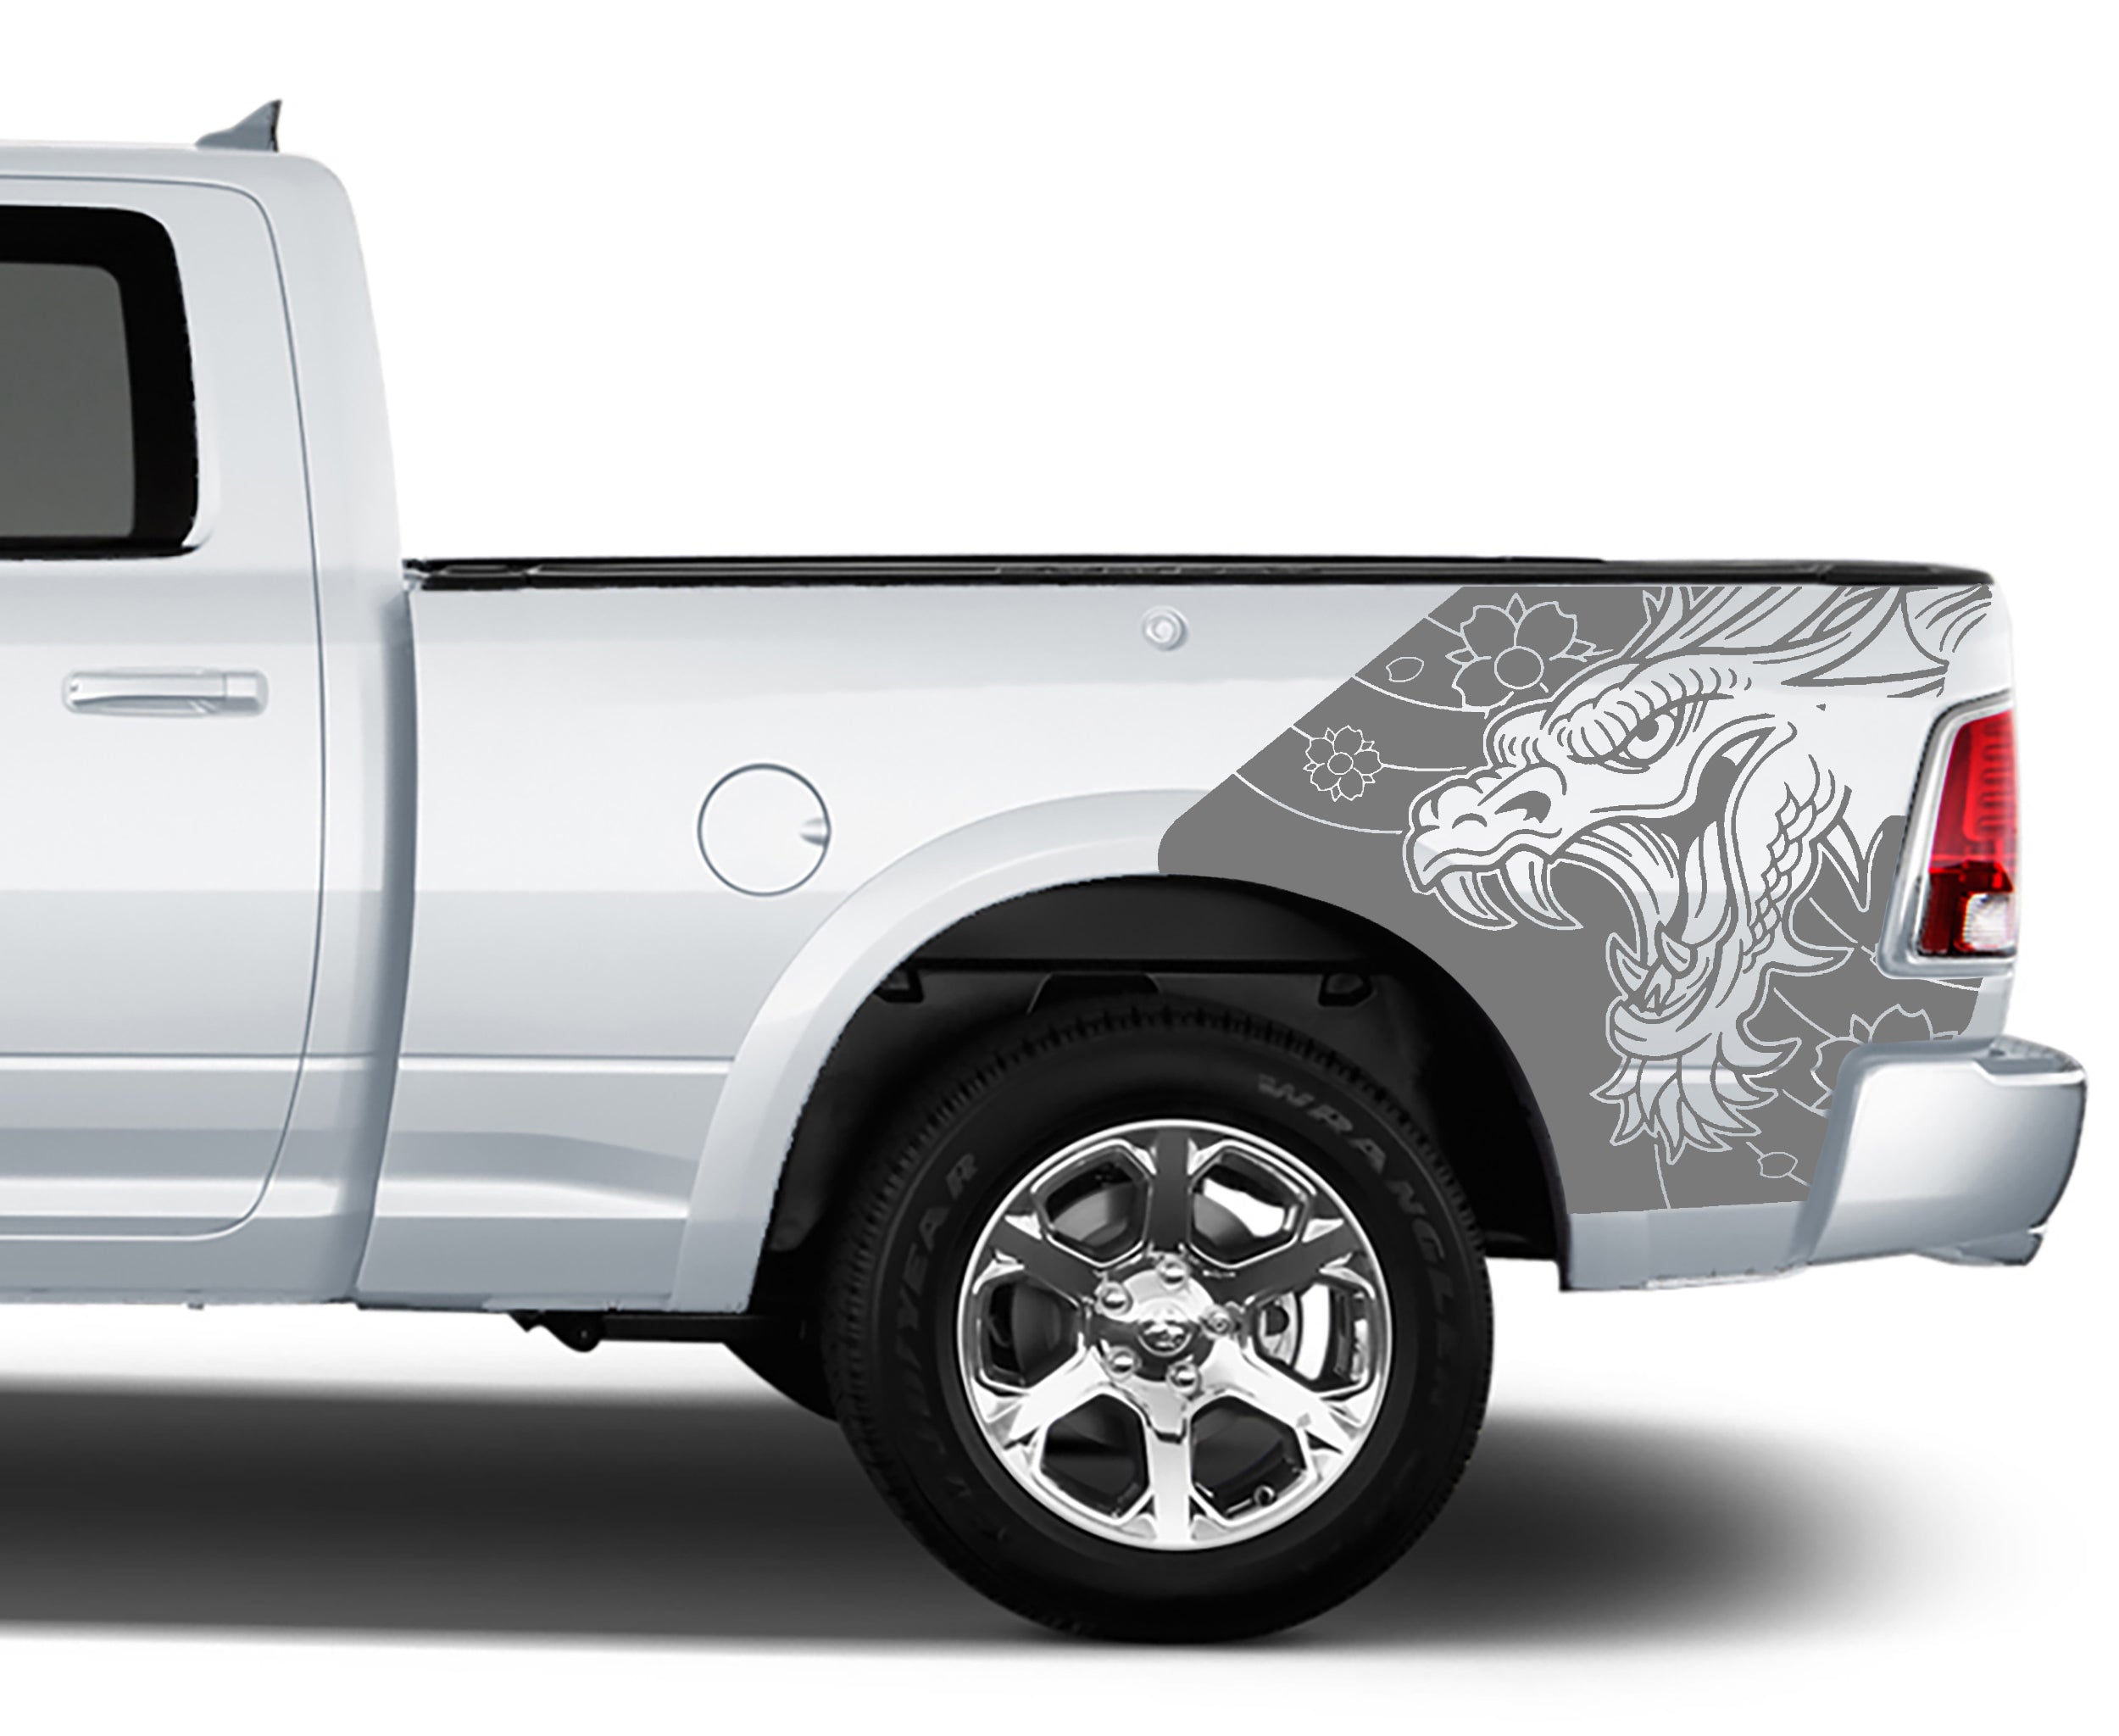 dragon bed graphics for dodge ram 2008 to 2018 models gray